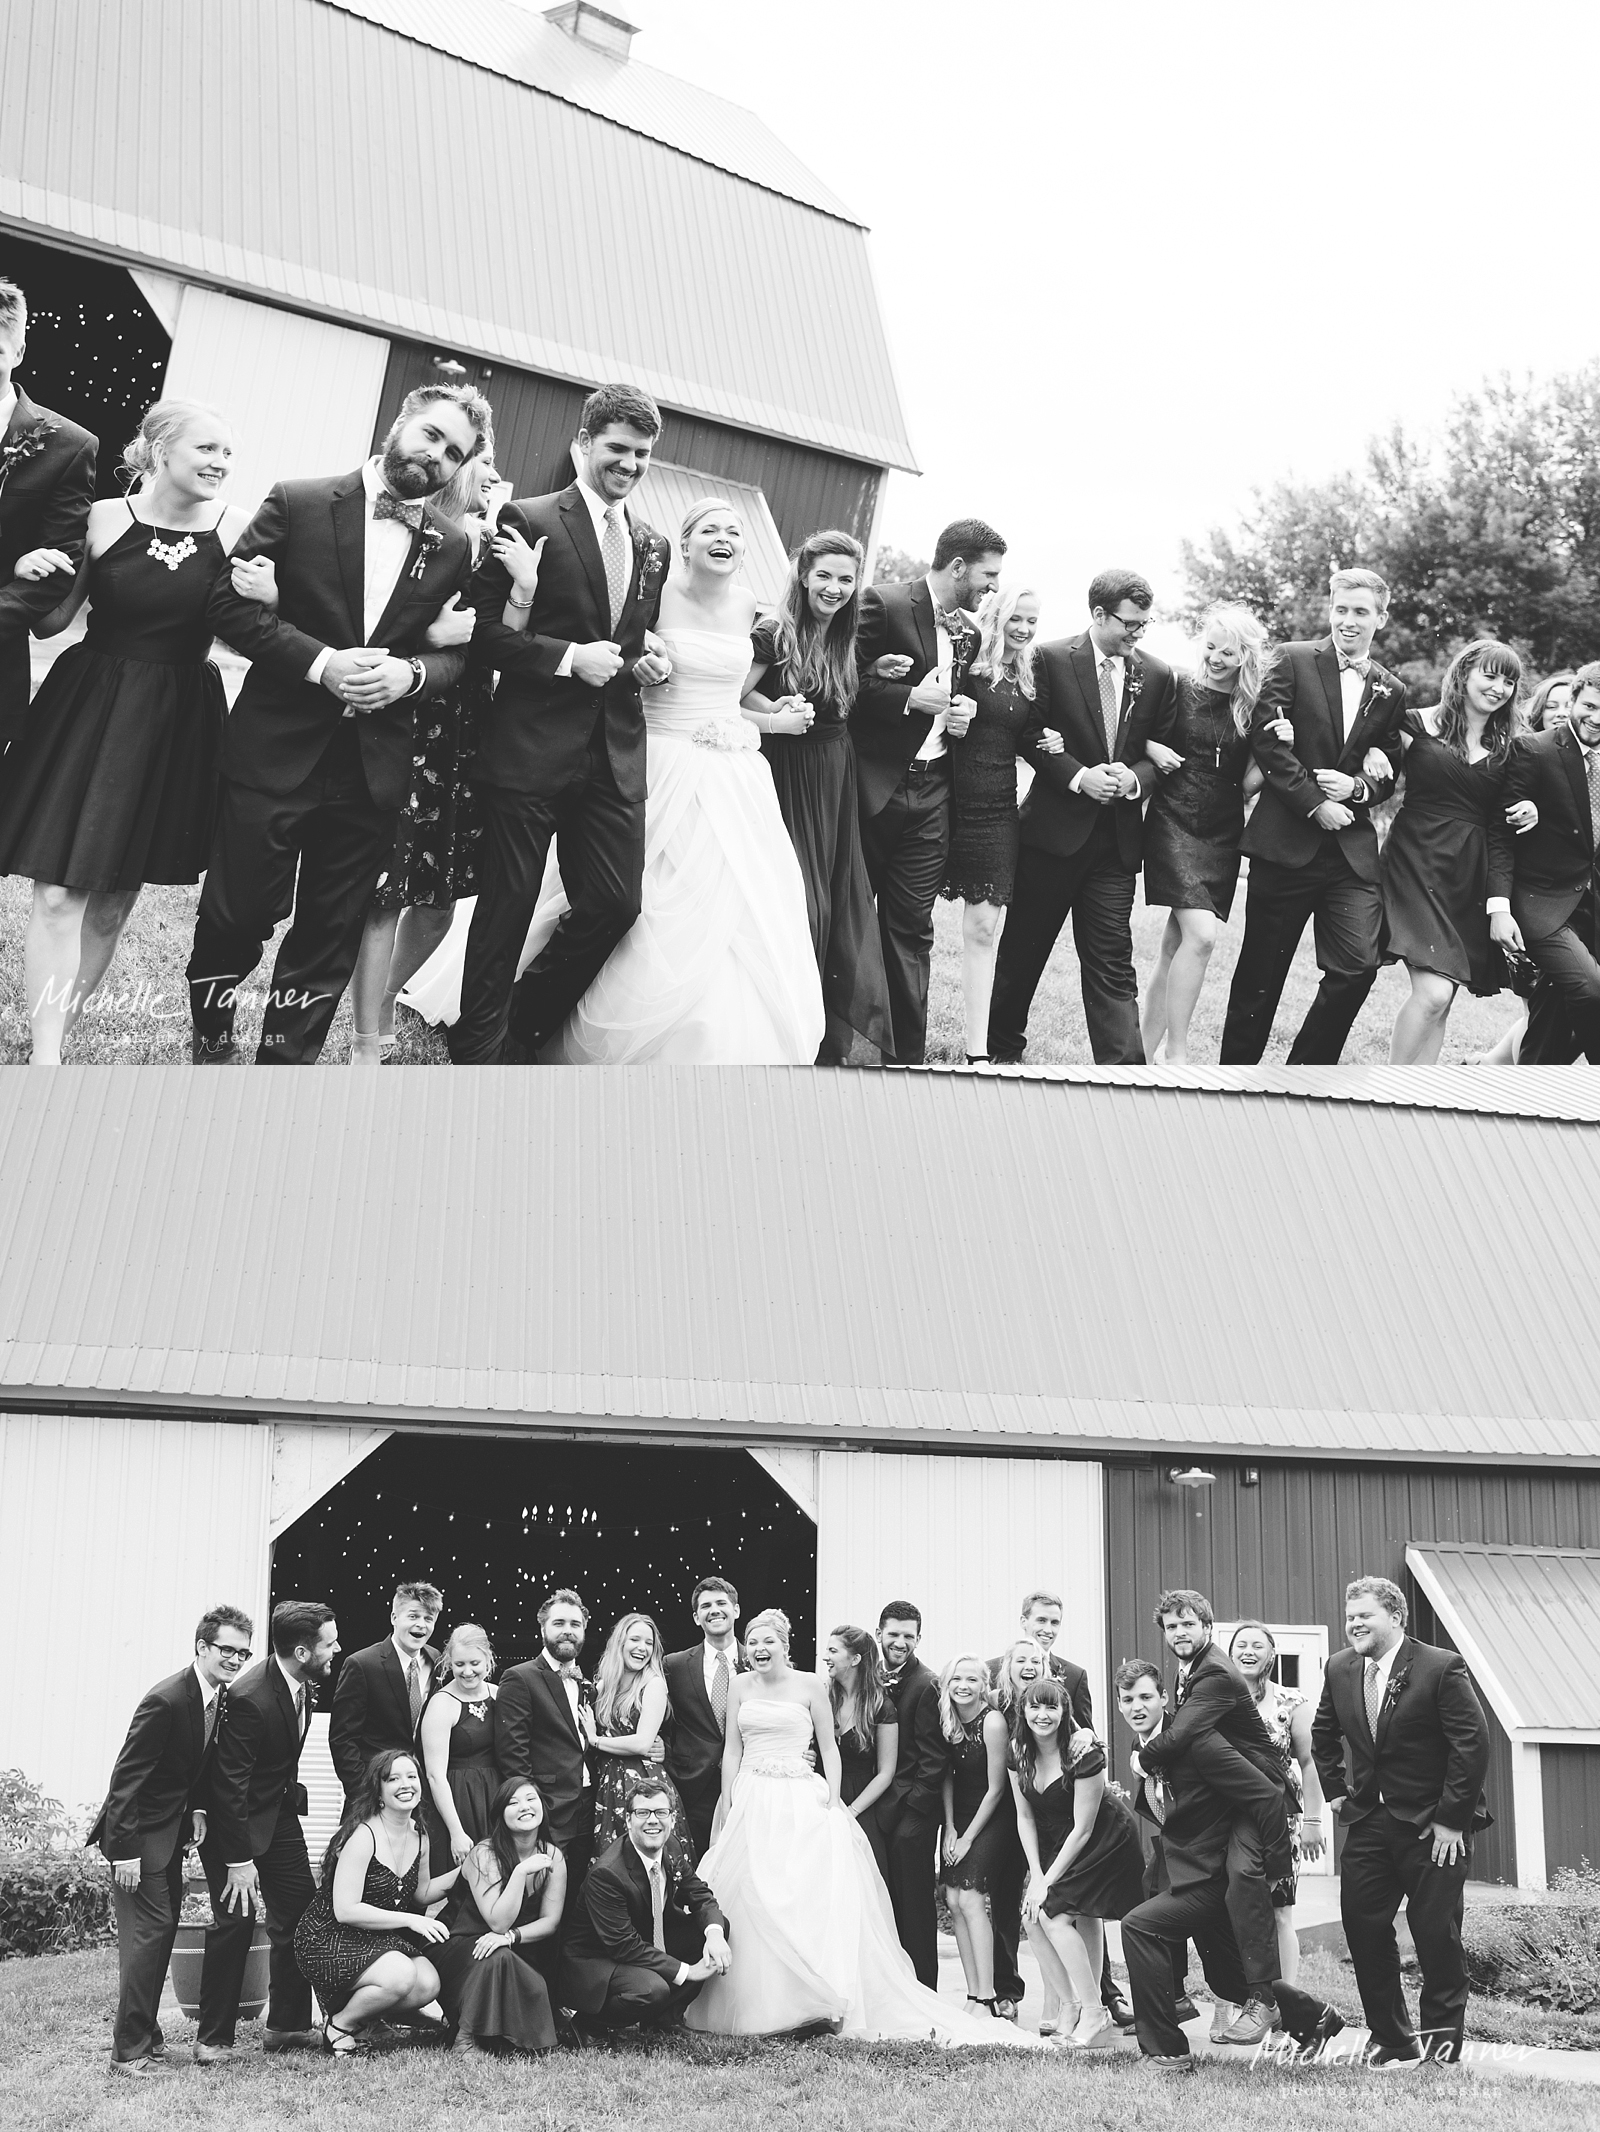 Creative Wedding Party Pictures